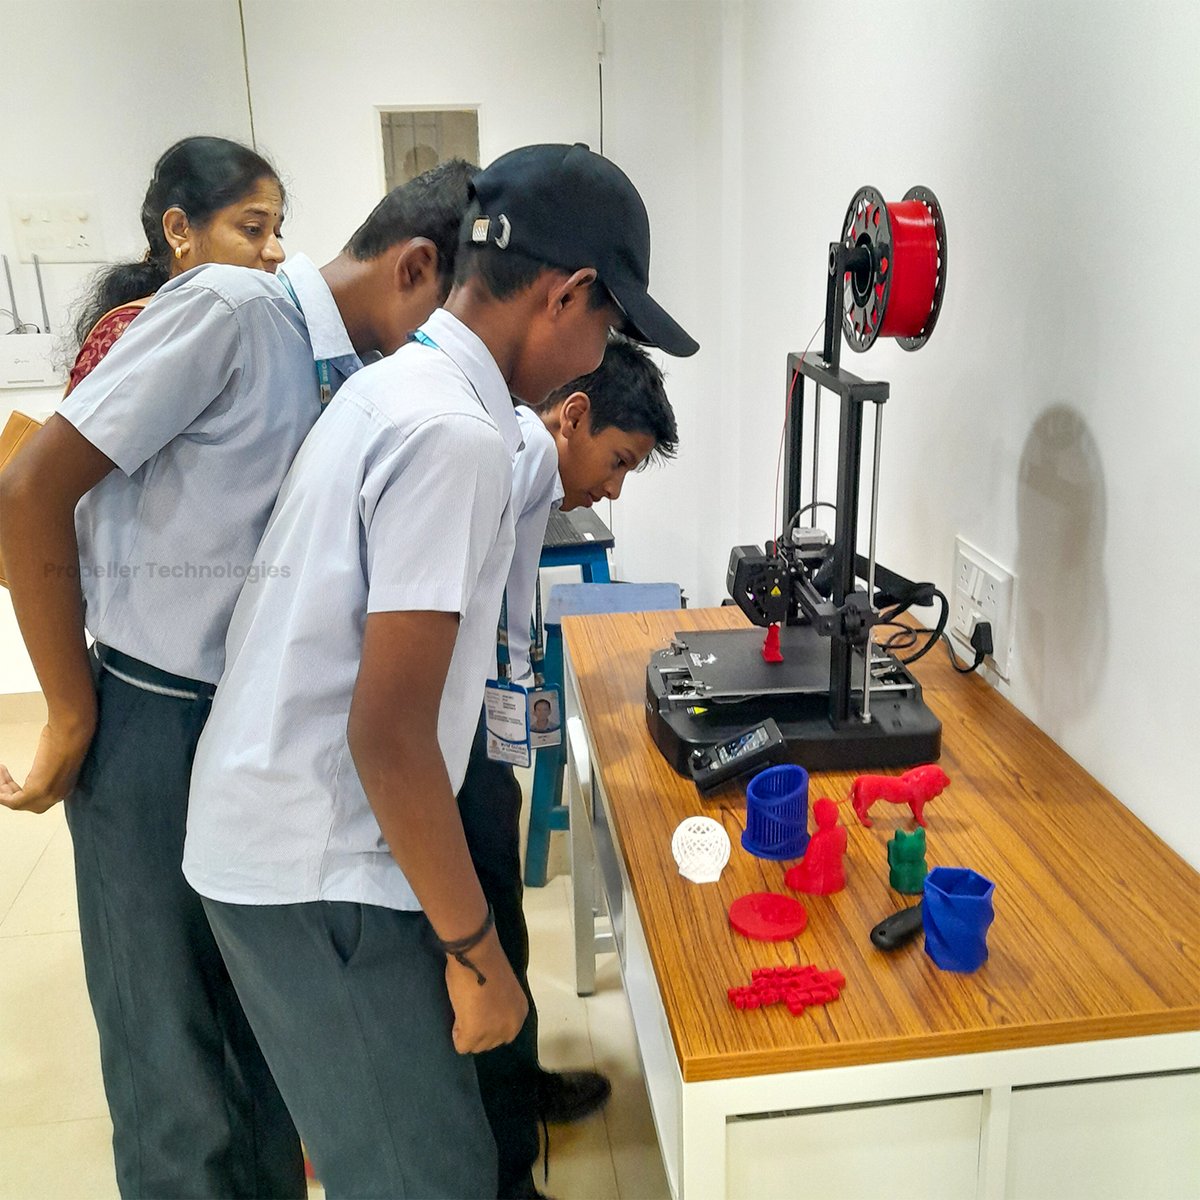 Welcome to our fully advanced @propellertechs STEM lab at BVM School, Coimbatore! Empowering young minds with cutting-edge STEM education. For details, contact us at 7540040079 / 7540040071, propellertechs@gmail.com, propellertechnologies.in #STEM #education #Coimbatore #Trichy